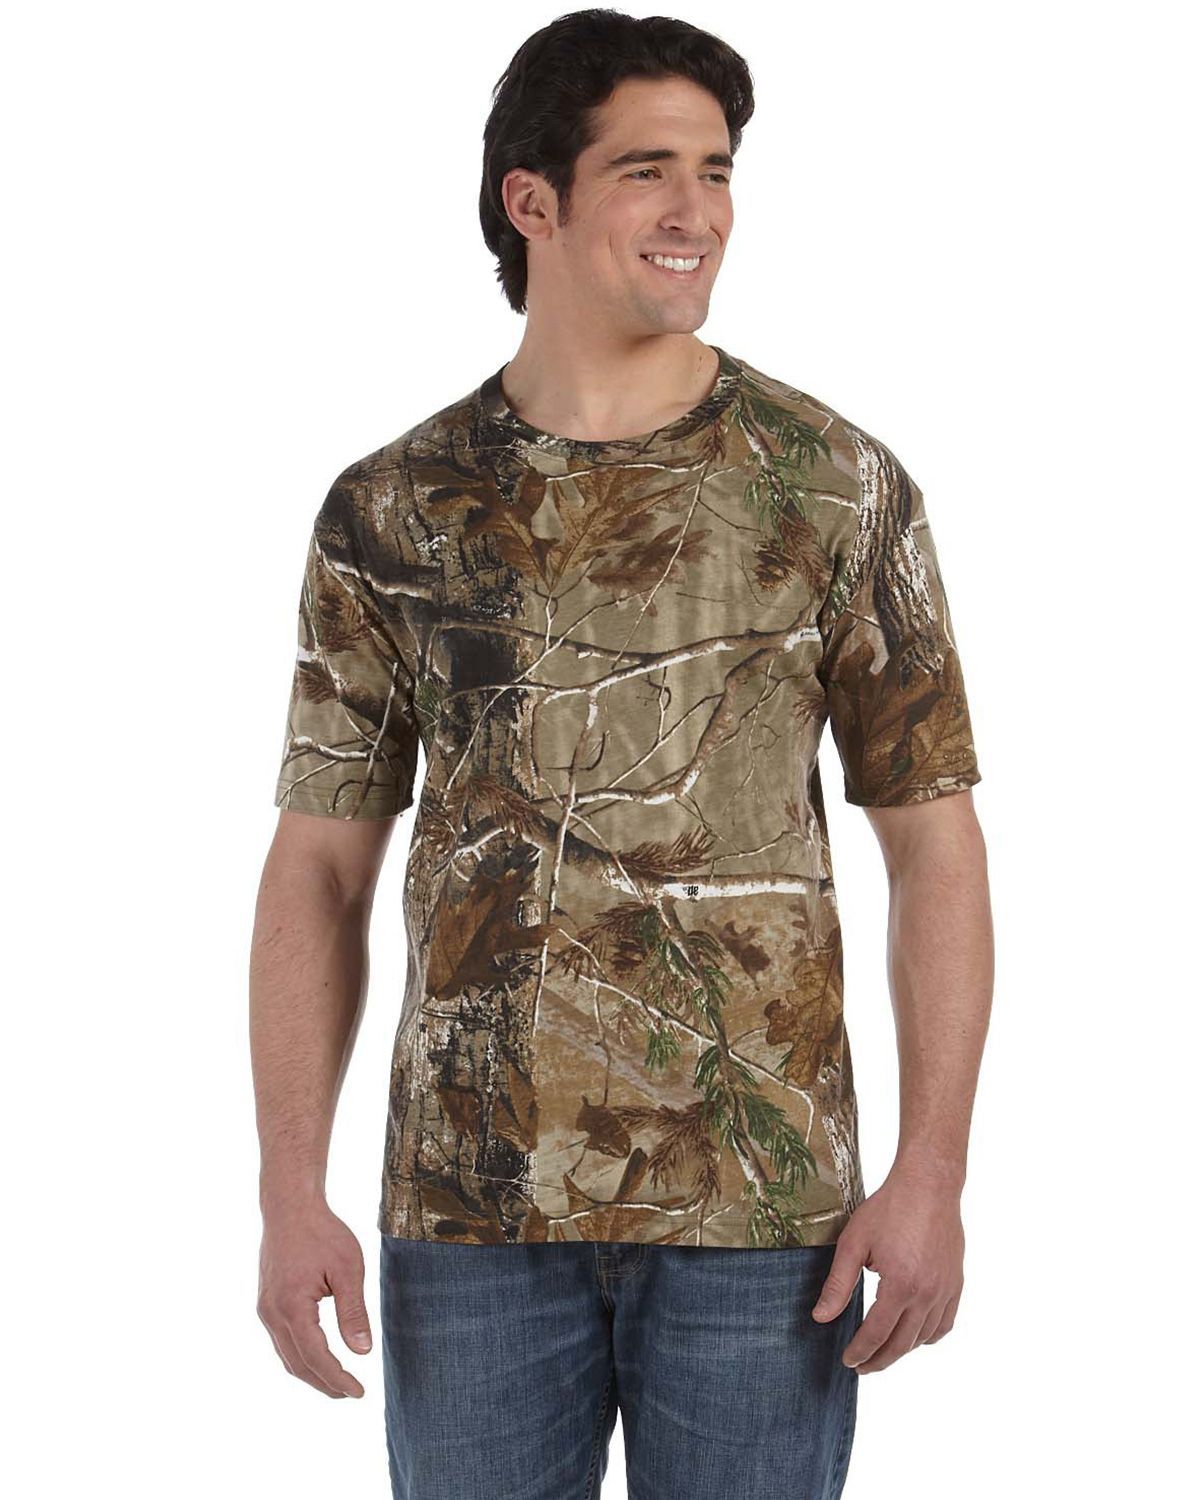 Men's Long Sleeve Forest Camo T-Shirt Realtree Print Woodland Camouflage Top 